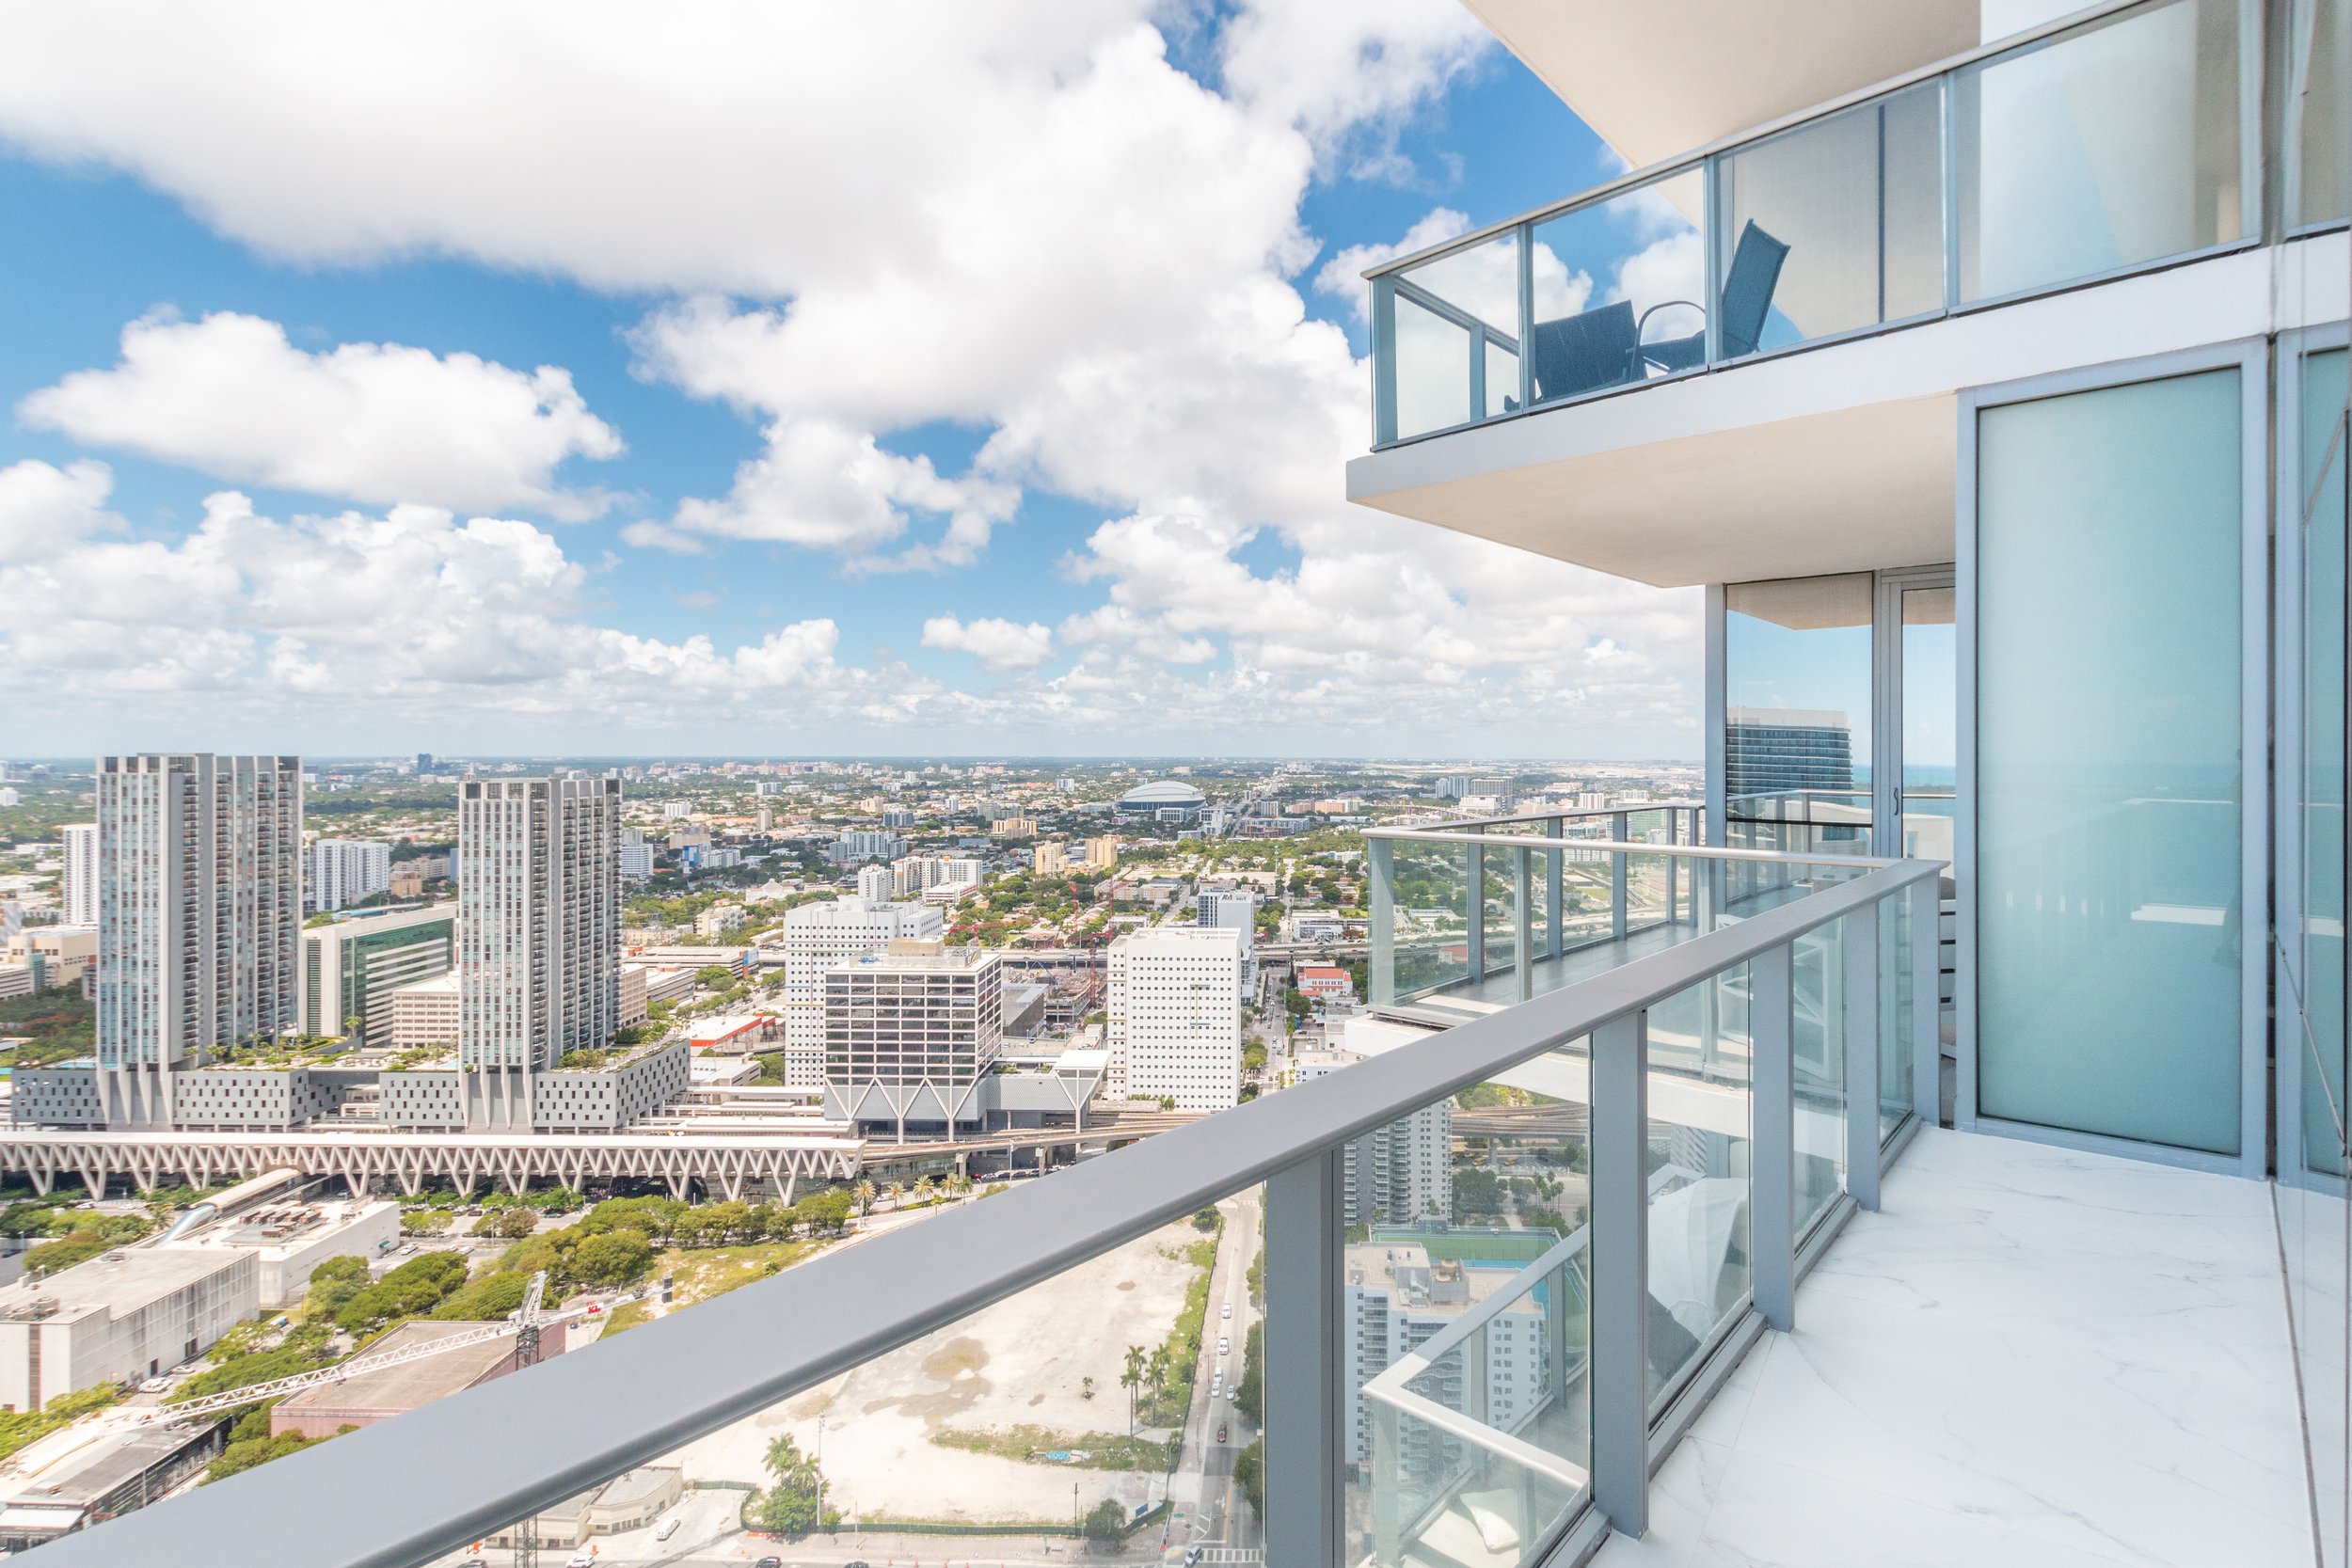 Step Inside A Sky-High Ultra-Luxe Penthouse At PARAMOUNT Miami Worldcenter For Rent Asking $40K Per Month ALTARA Properties Scott Lawrence Porter 1.33.jpg